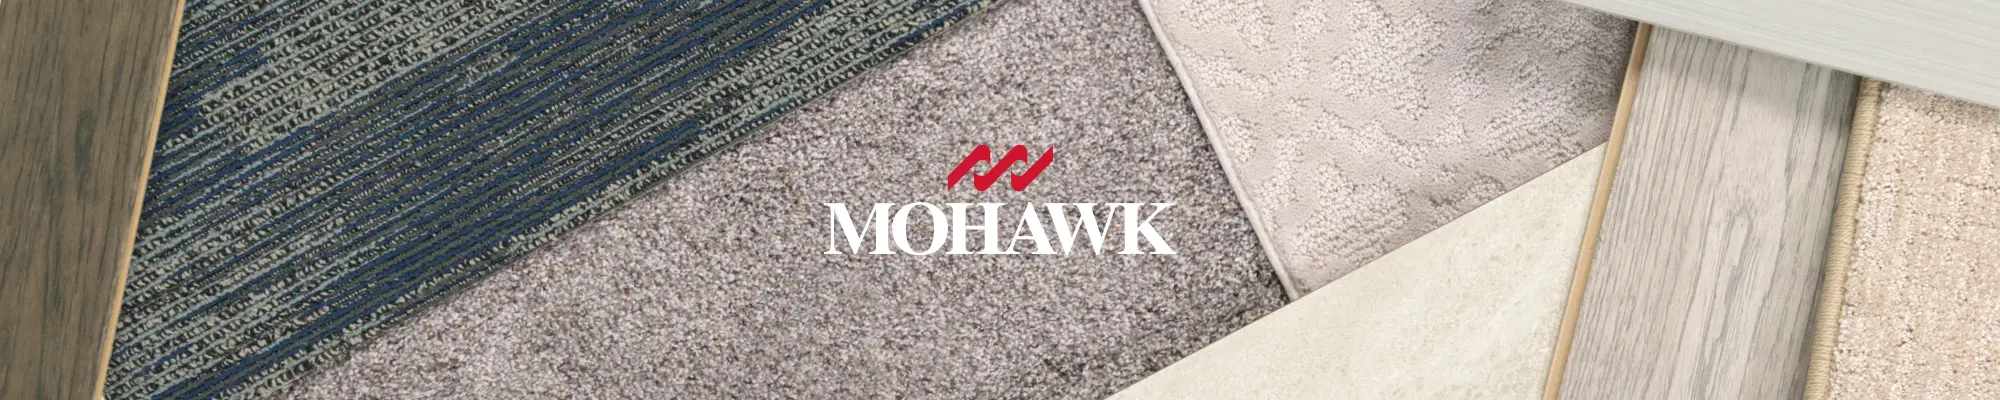 Browse Mohawk products from Pandolfi House of Carpets & Flooring | Springfield, PA's shop at home flooring provider